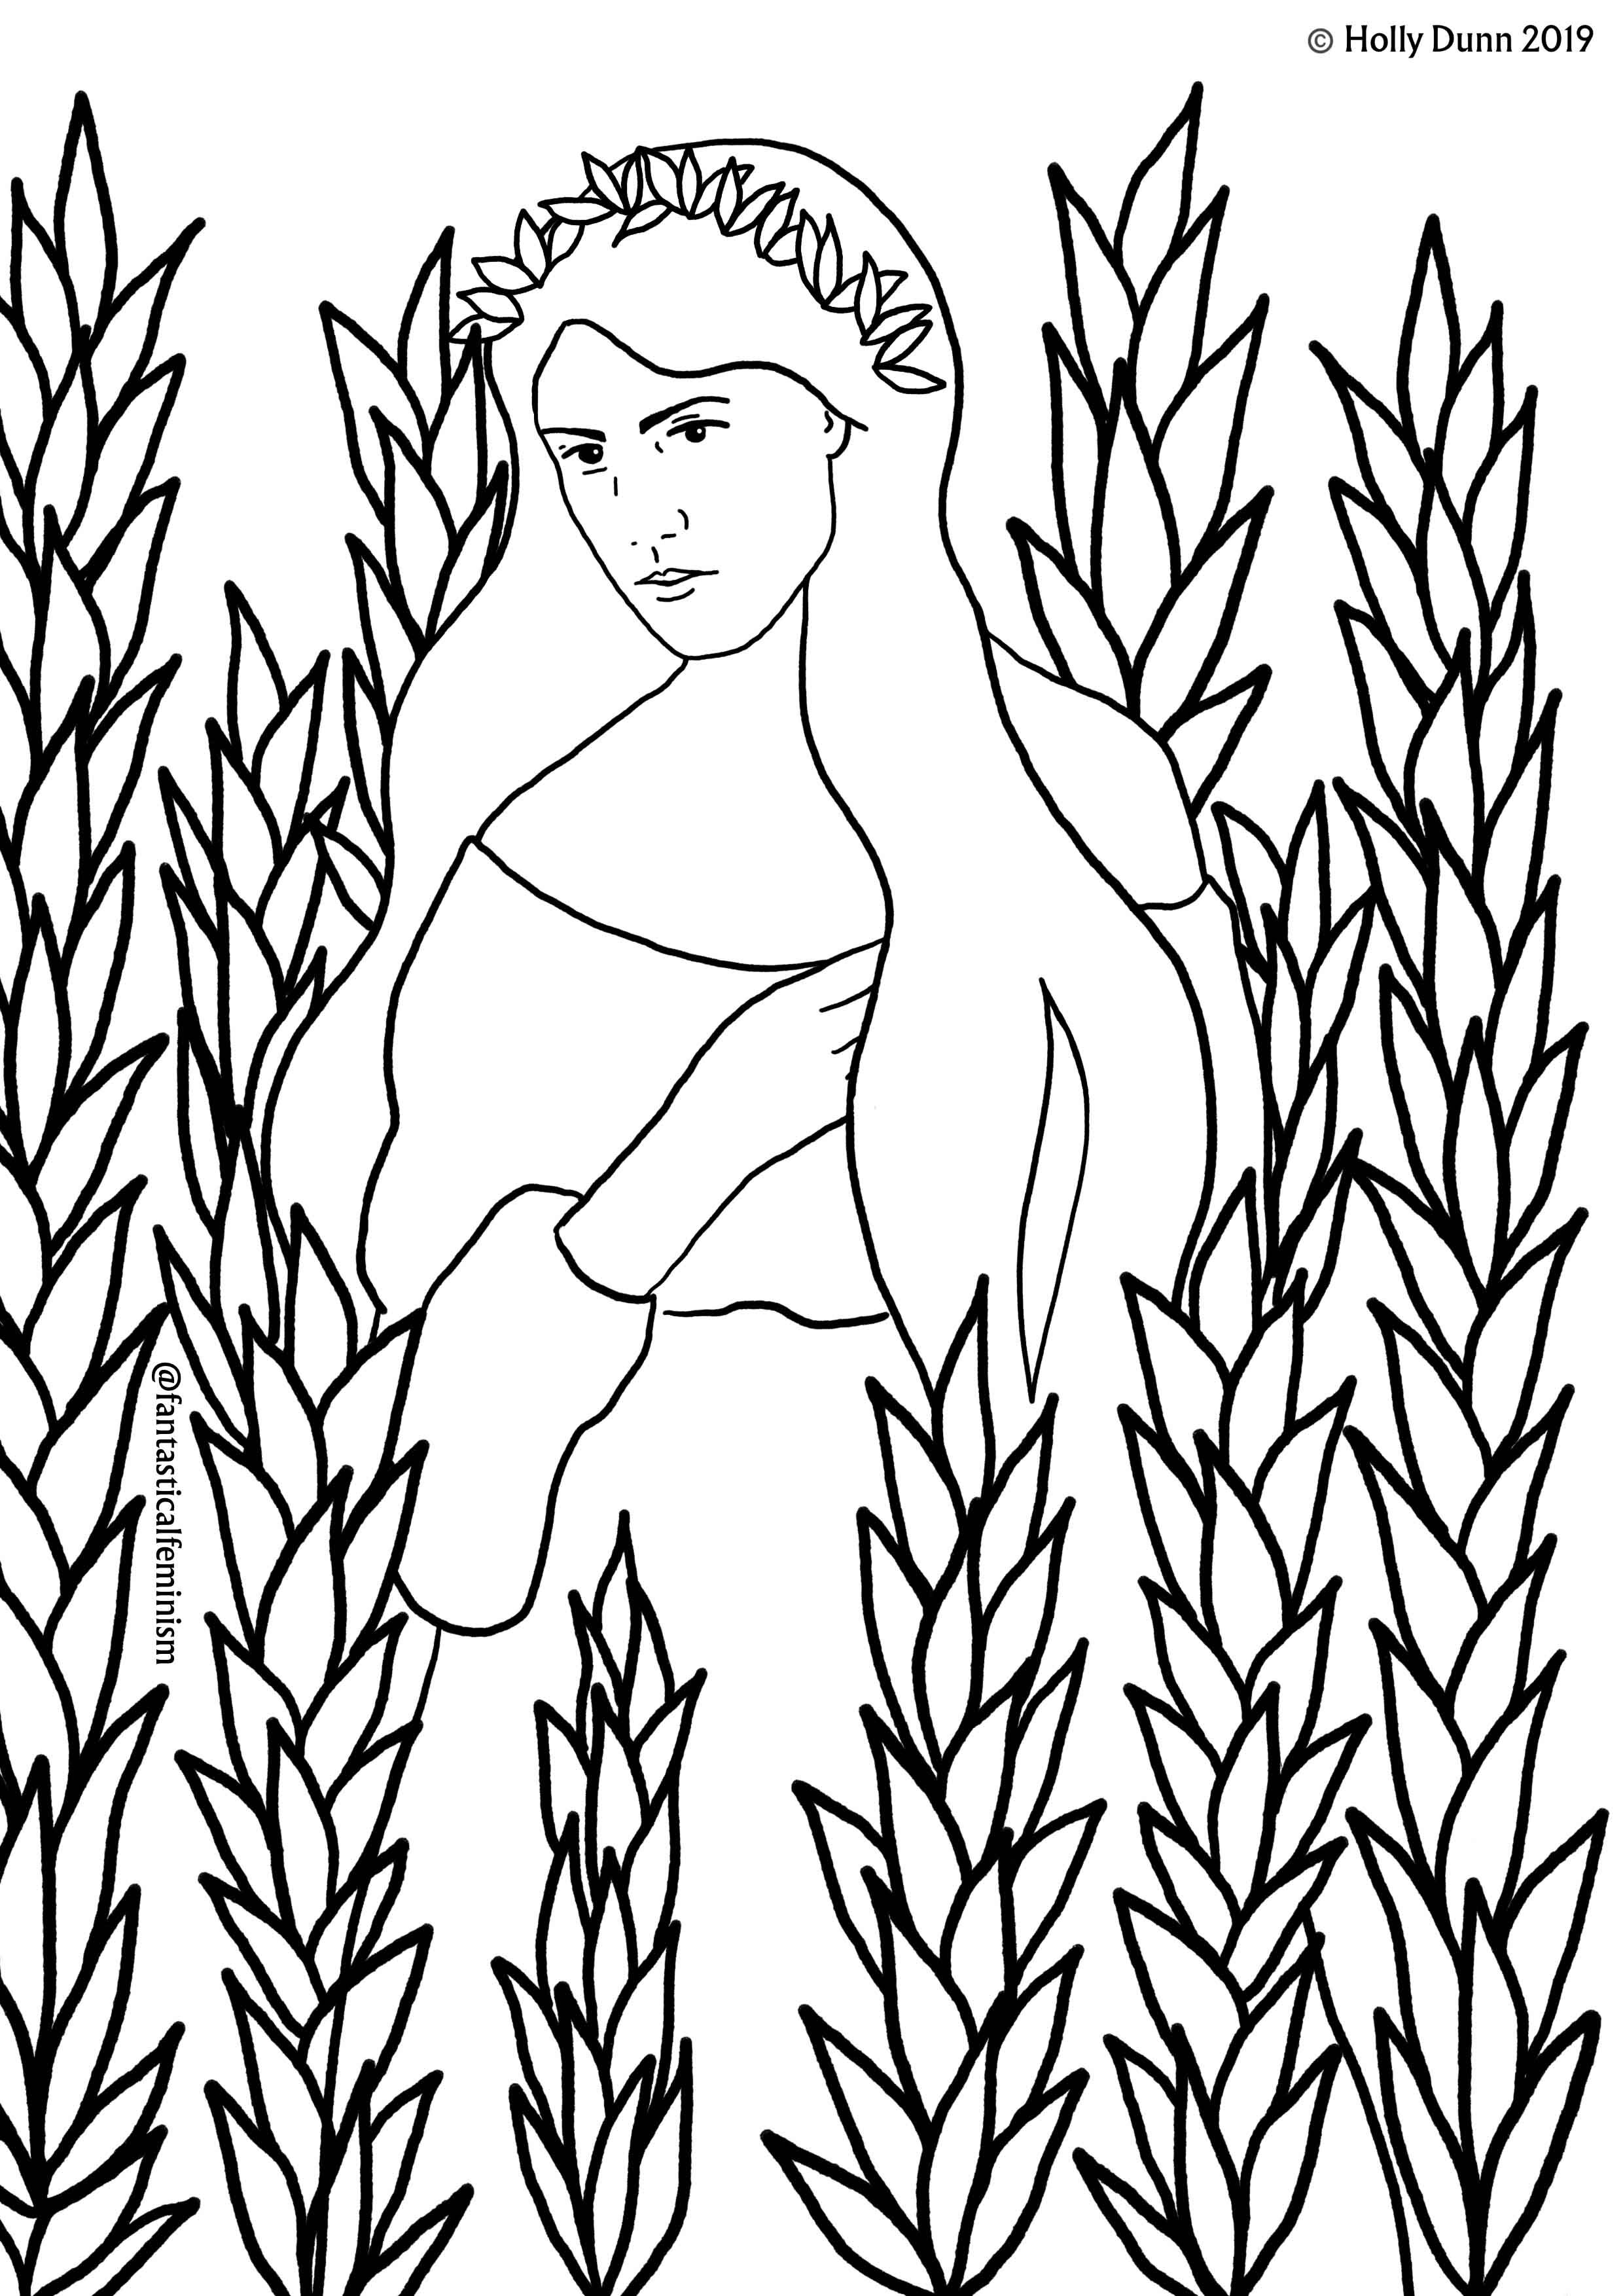 Free Colouring Pages — Holly Dunn Design